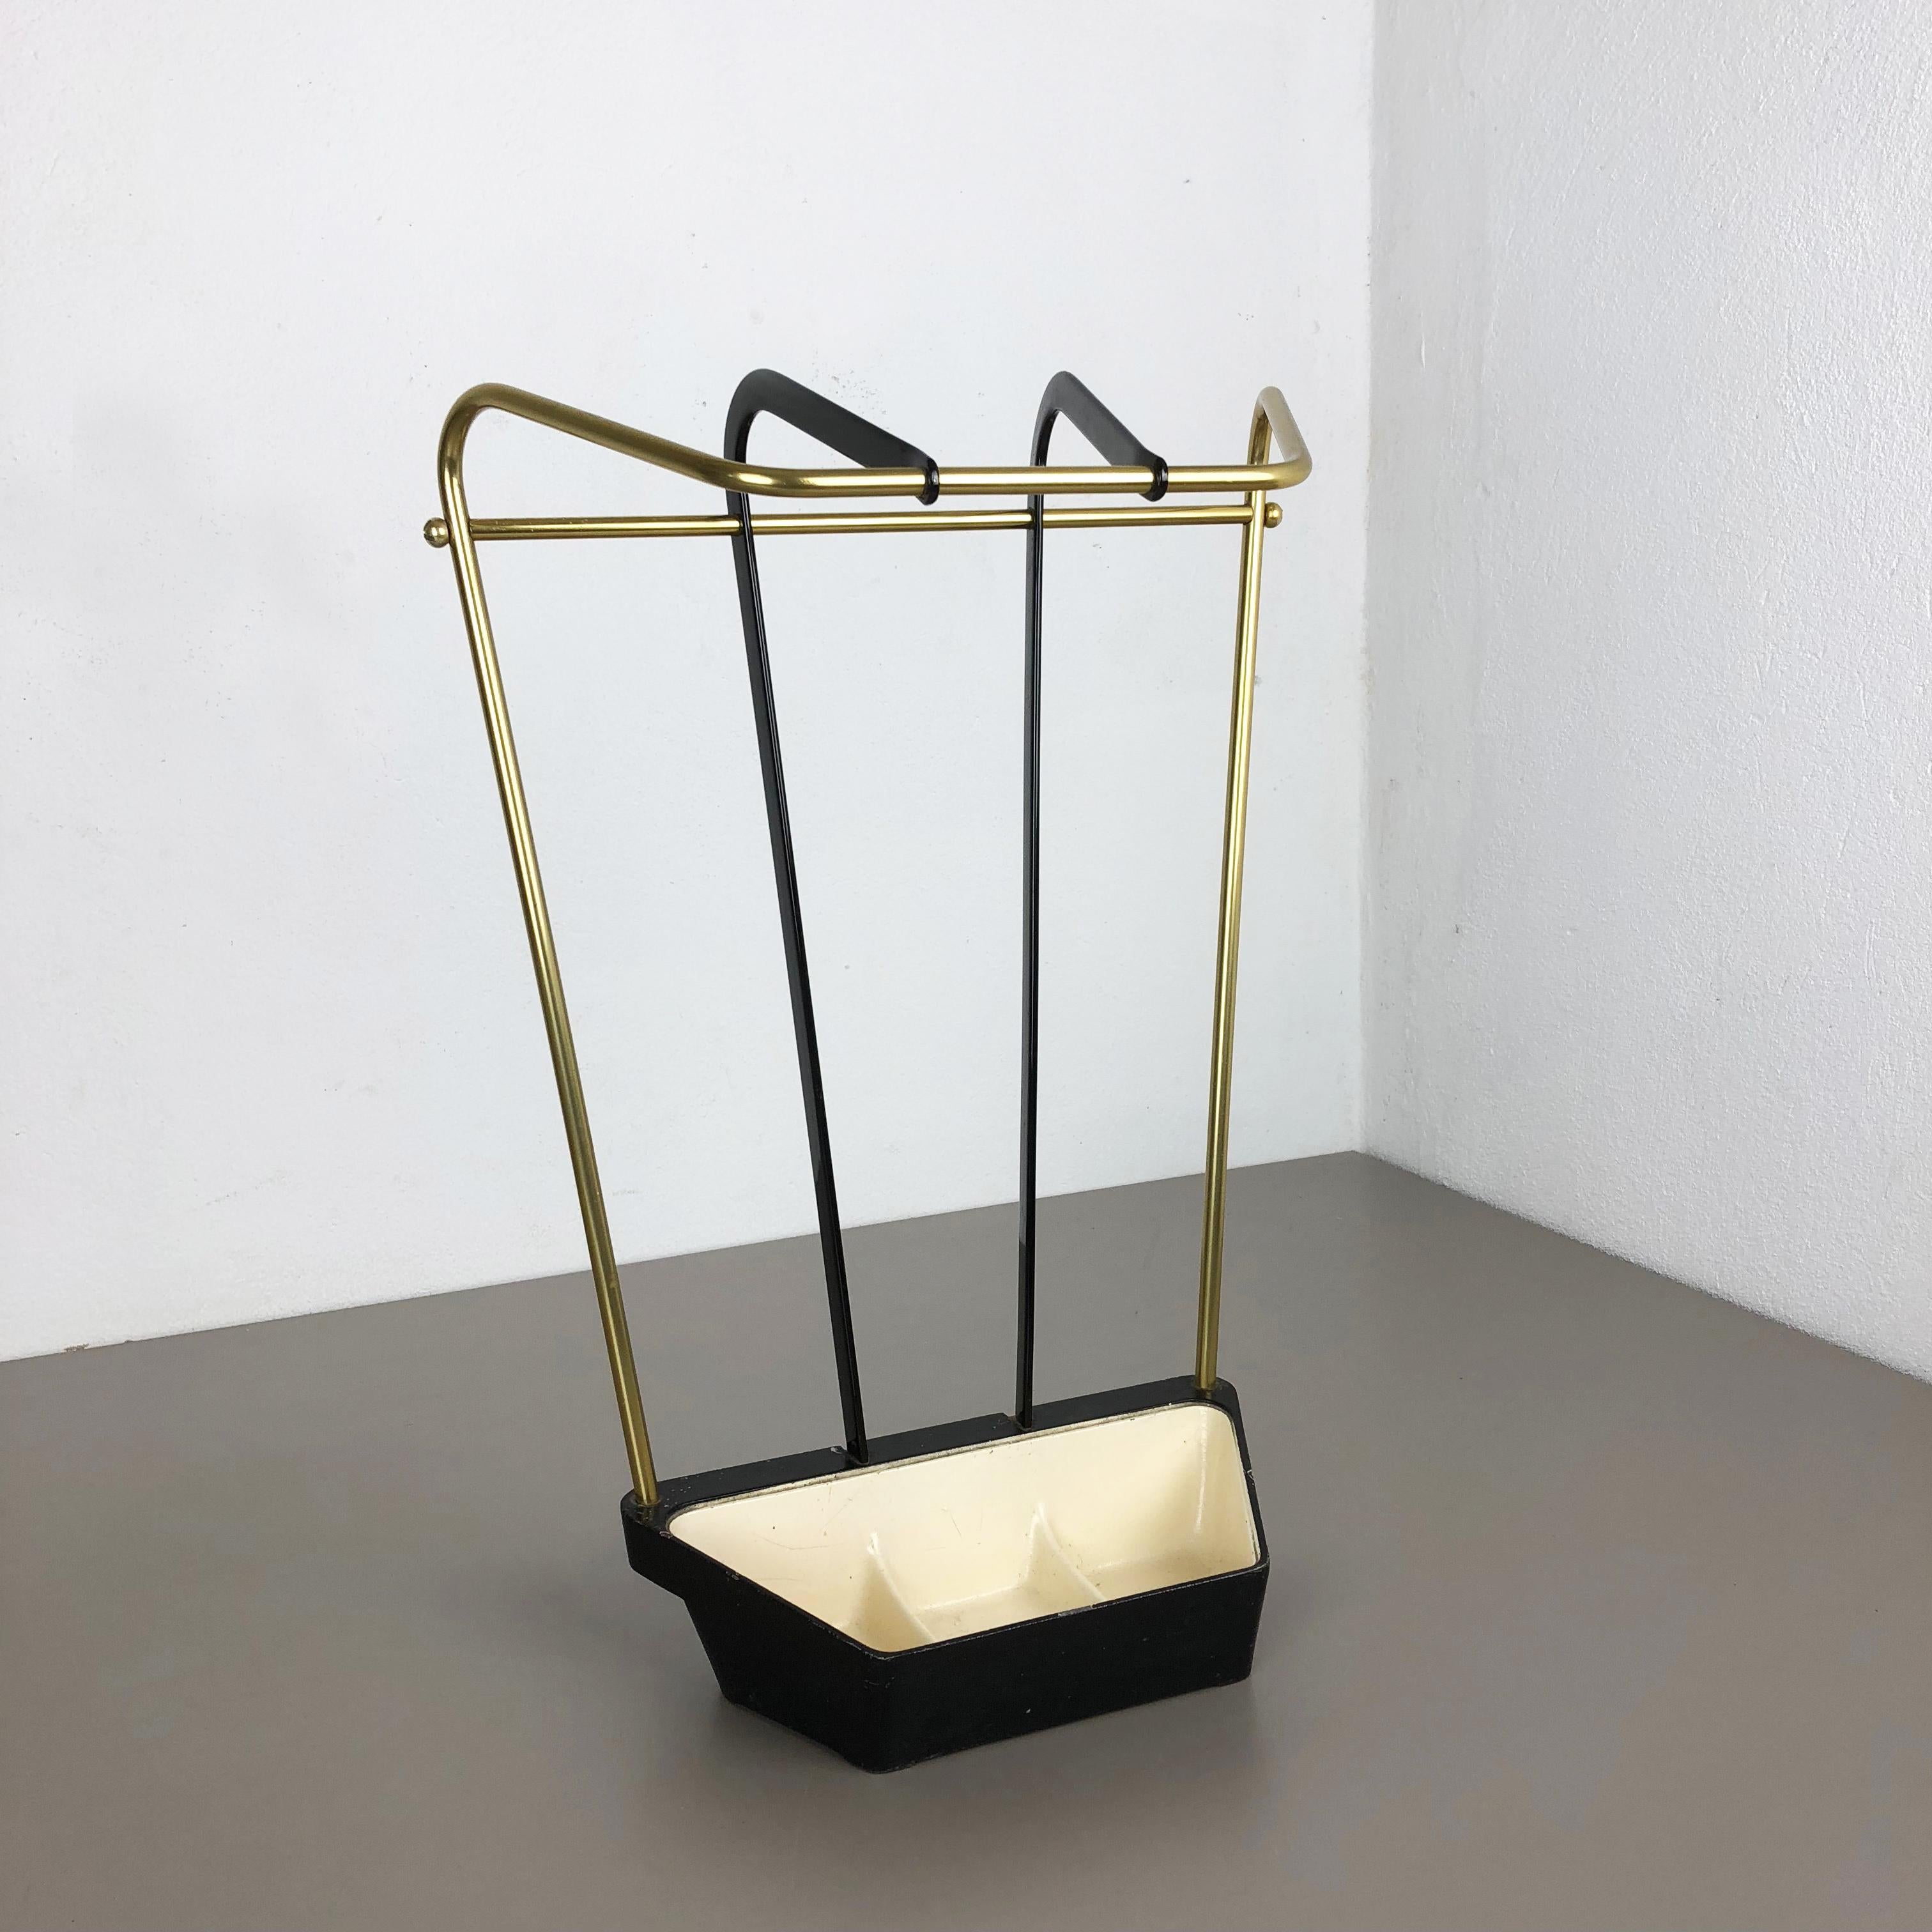 Article:

Bauhaus umbrella stand


Origin:

Germany


Age:

1950s


This original vintage Bauhaus style umbrella Stand was produced in the 1950s in Germany. it is made of solid metal with brass applications at the top and upright Stand, the heavy